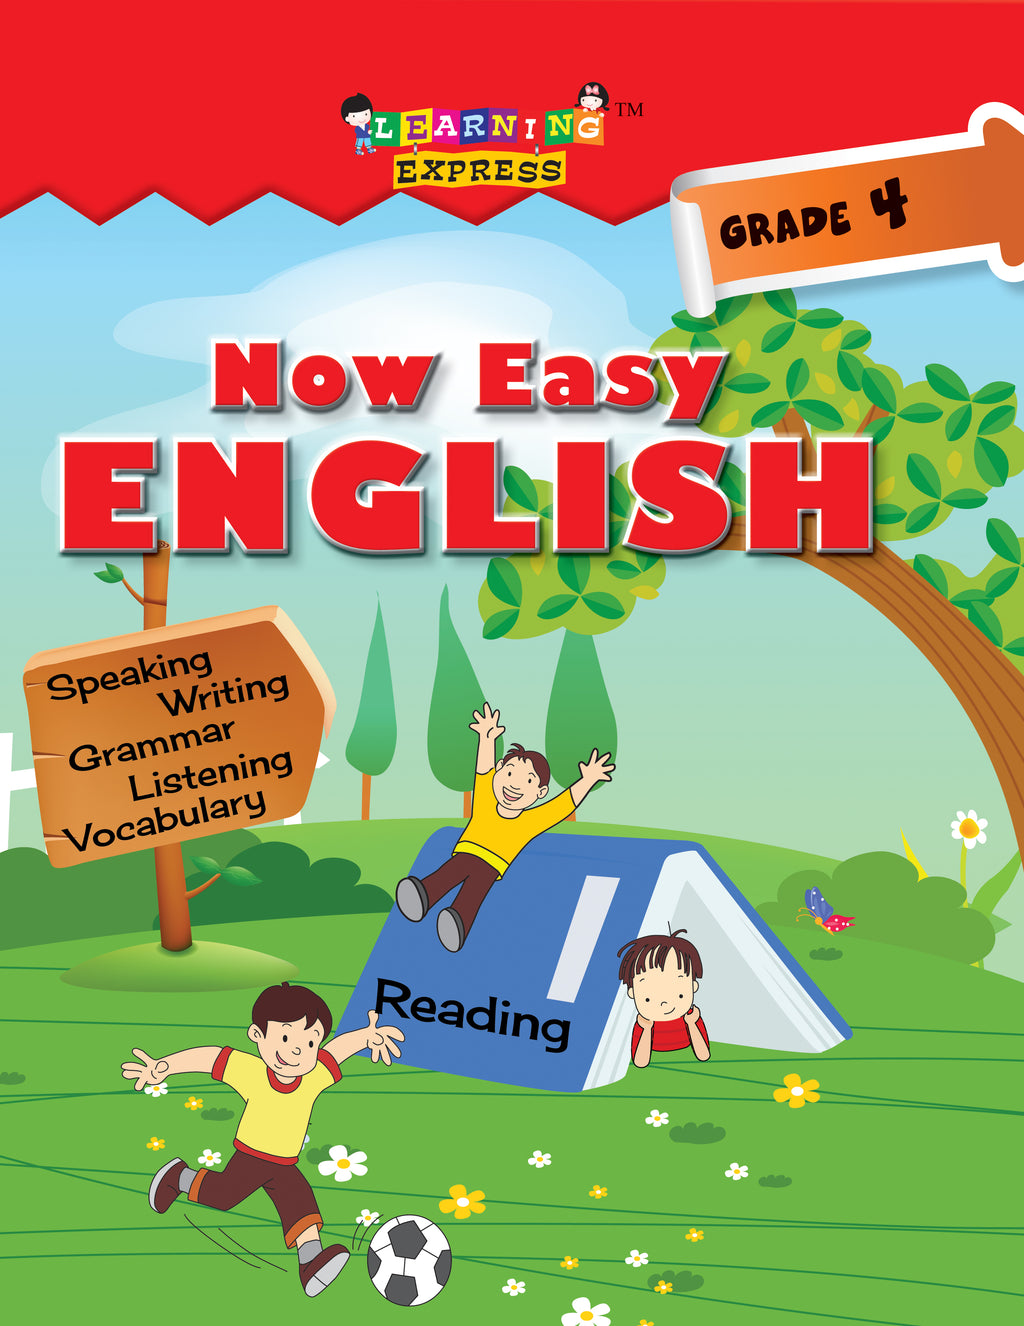 NOW　Book　Express　Vikram　Learning　Text　EASY　ENGLISH　Grade